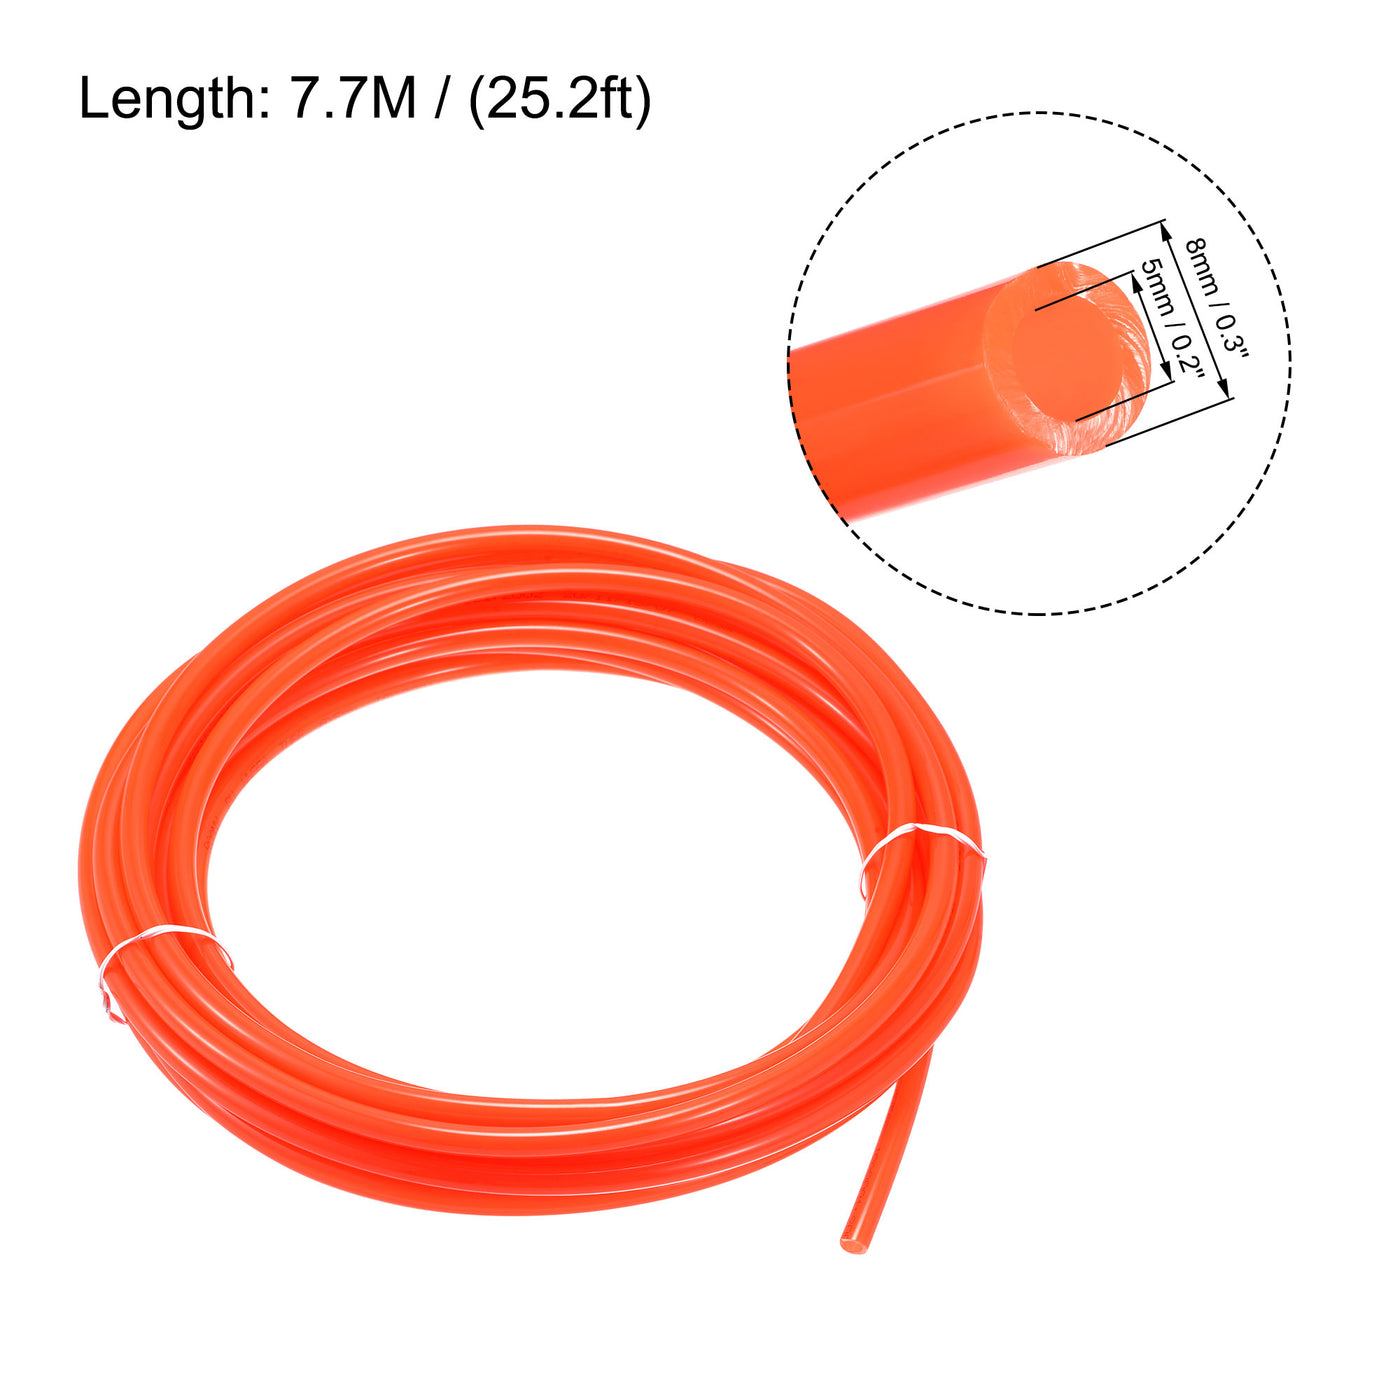 uxcell Uxcell Pneumatic Air Hose Tubing Air Compressor Tube 5mm/0.2''ID x 8mm/0.3''OD x 7.7m/25.2Ft Polyurethane Pipe Bright Orange